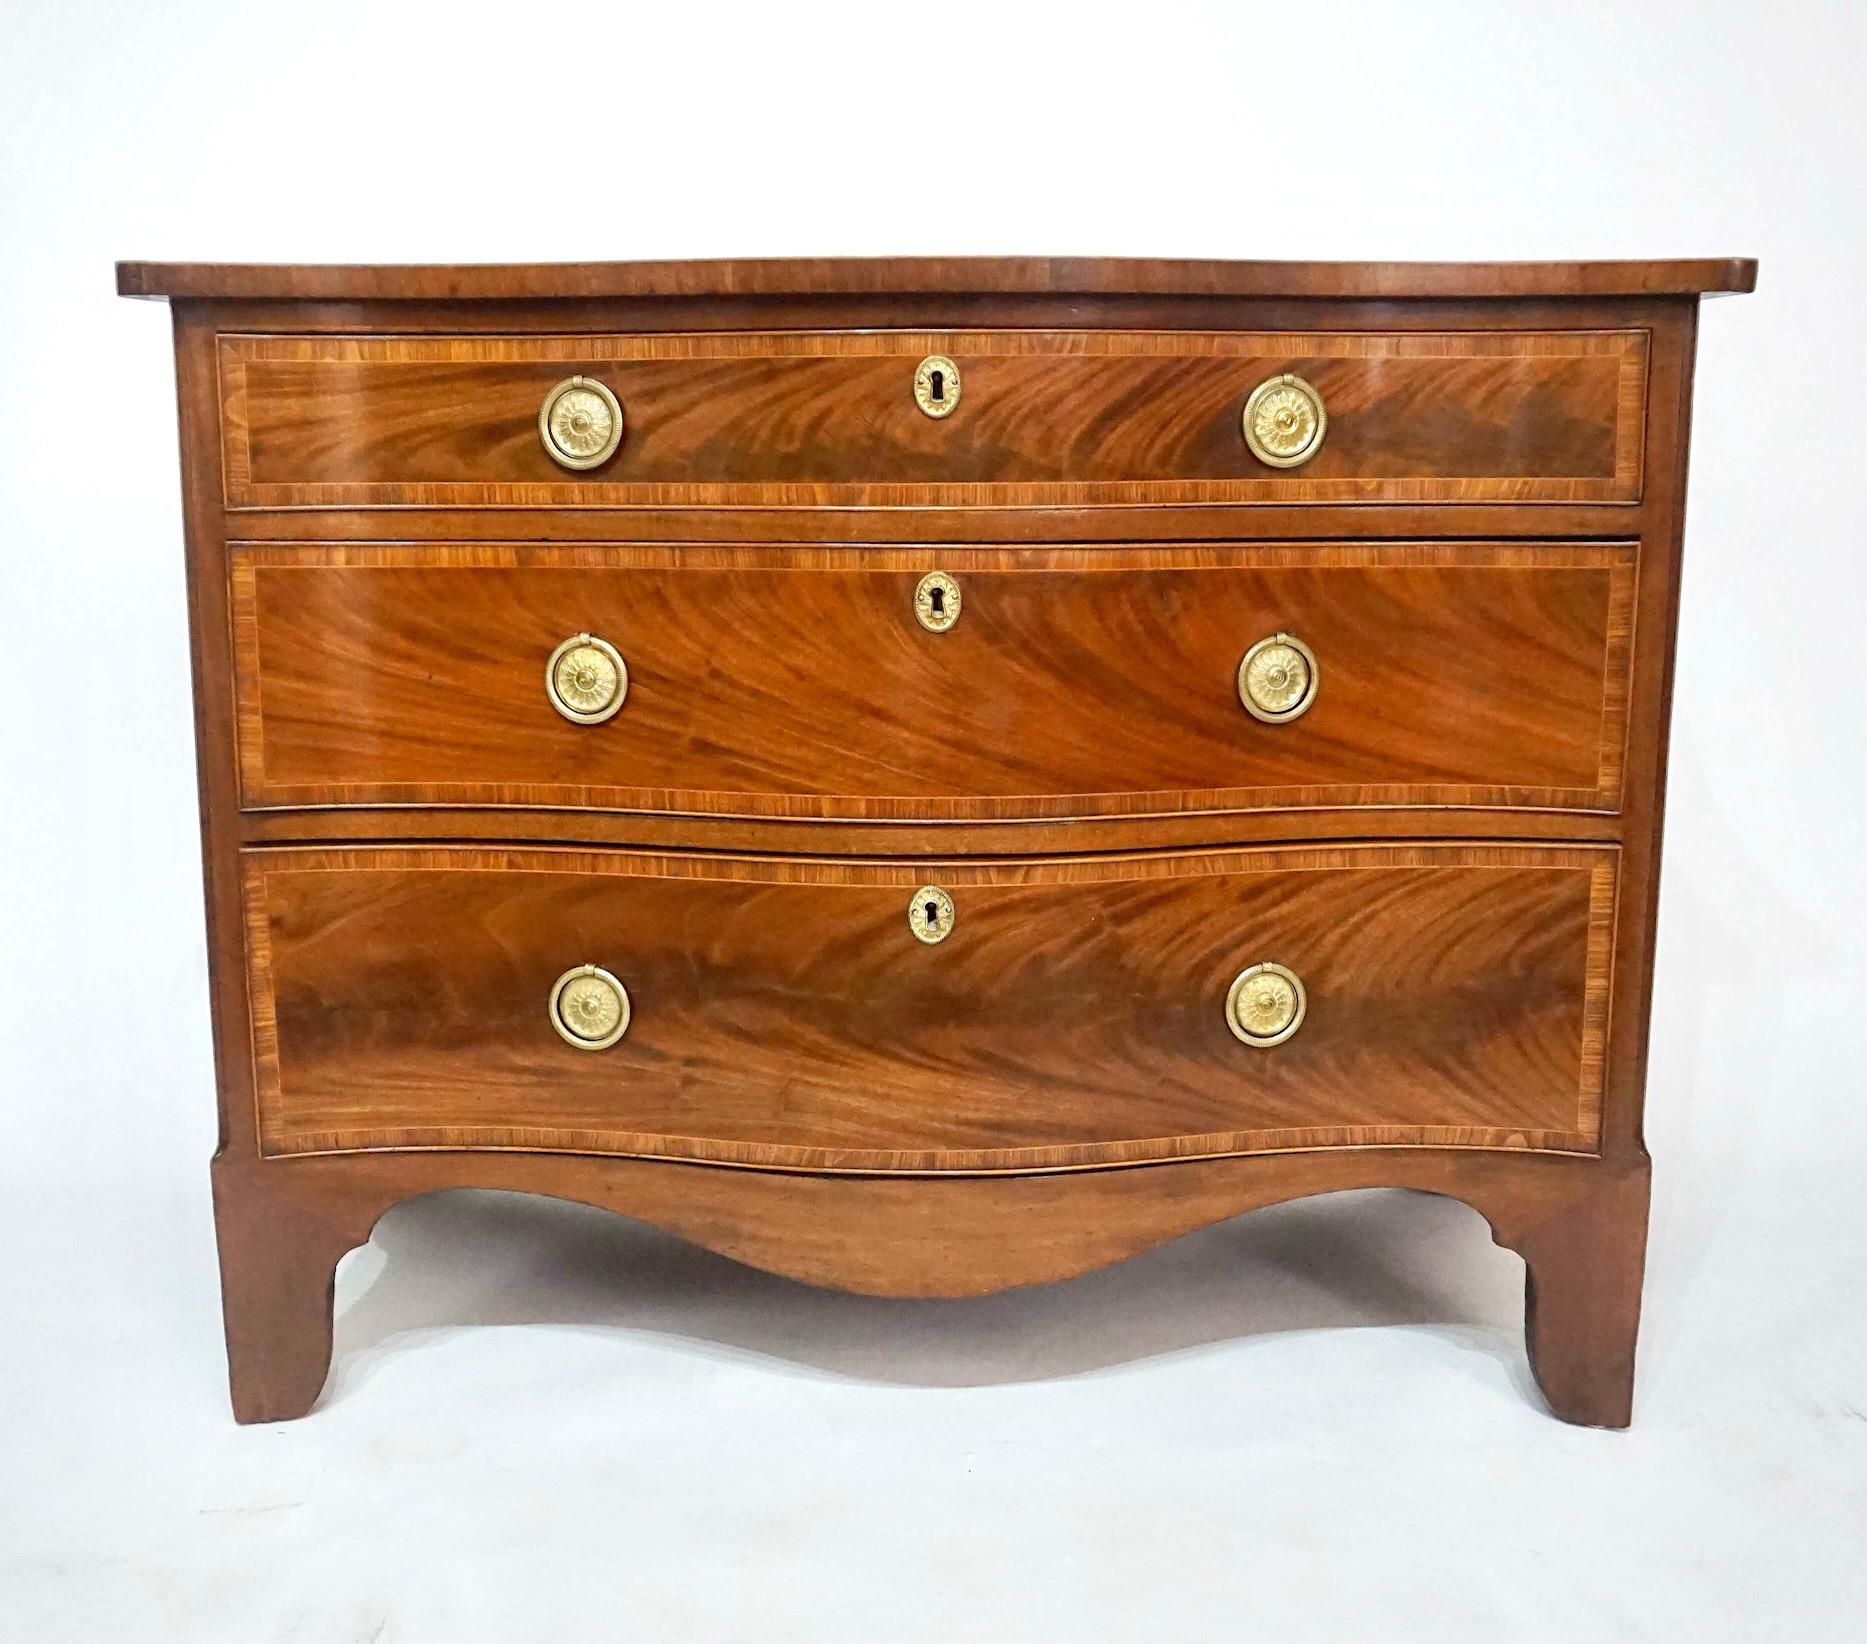 A fine circa 1785 English George III period Hepplewhite style three-drawer commode of serpentine form having exquisitely grained crotch mahogany veneers with kingwood crossbanding and  satinwood cockbeading and line-inlay, the drawers with original